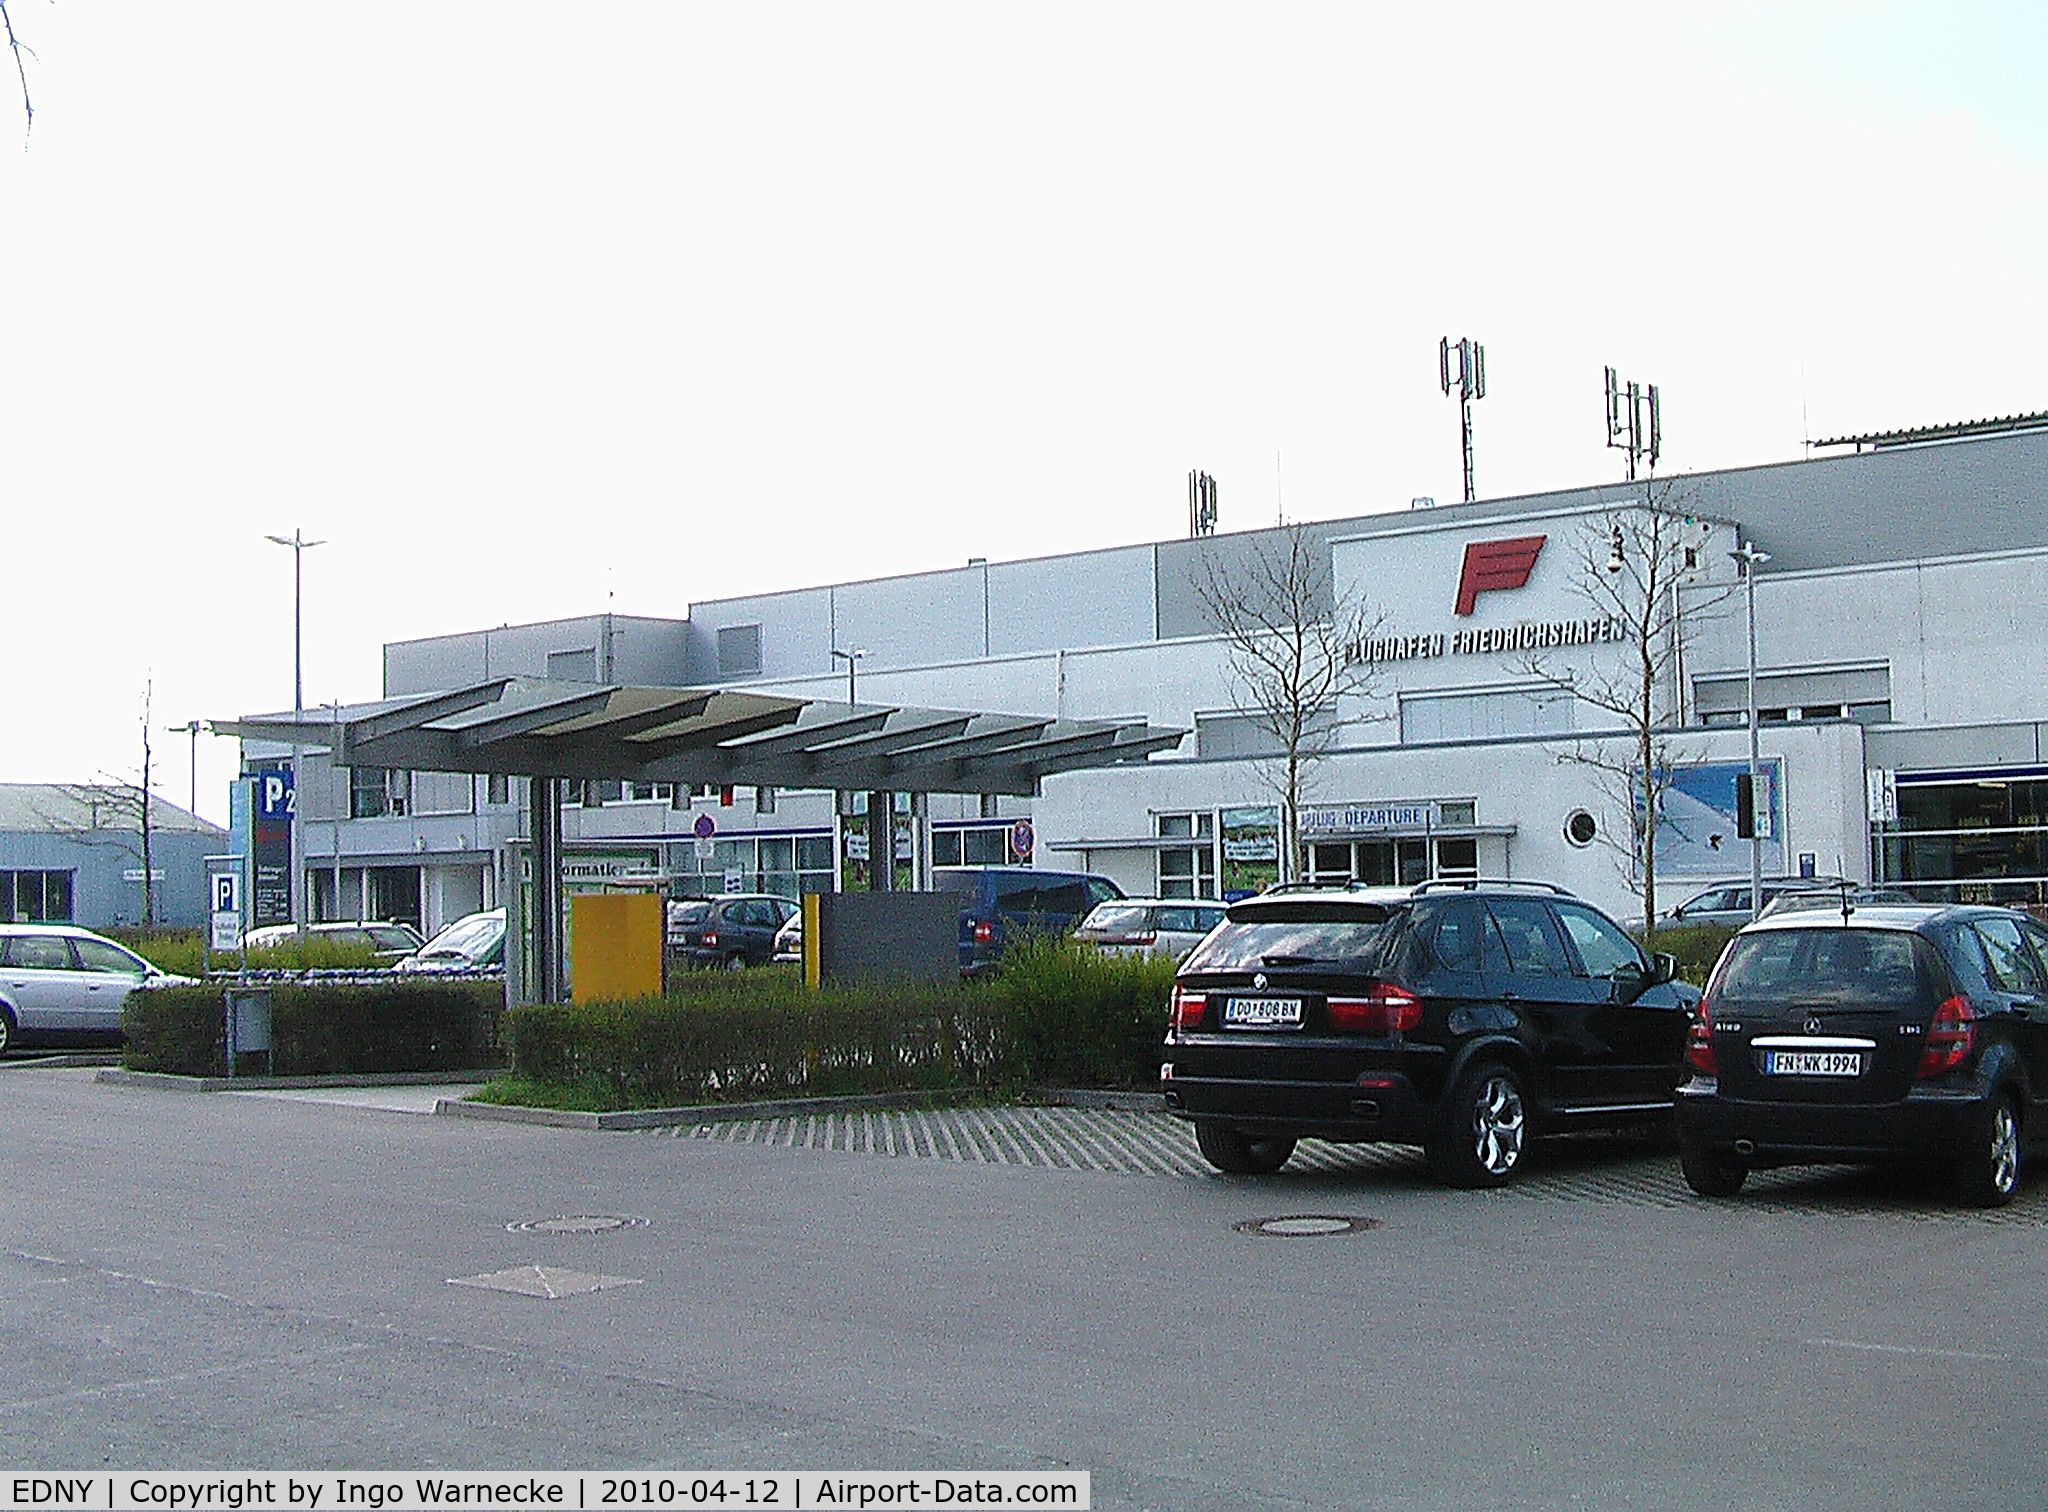 Bodensee Airport, Friedrichshafen Germany (EDNY) - the new terminal (streetside)